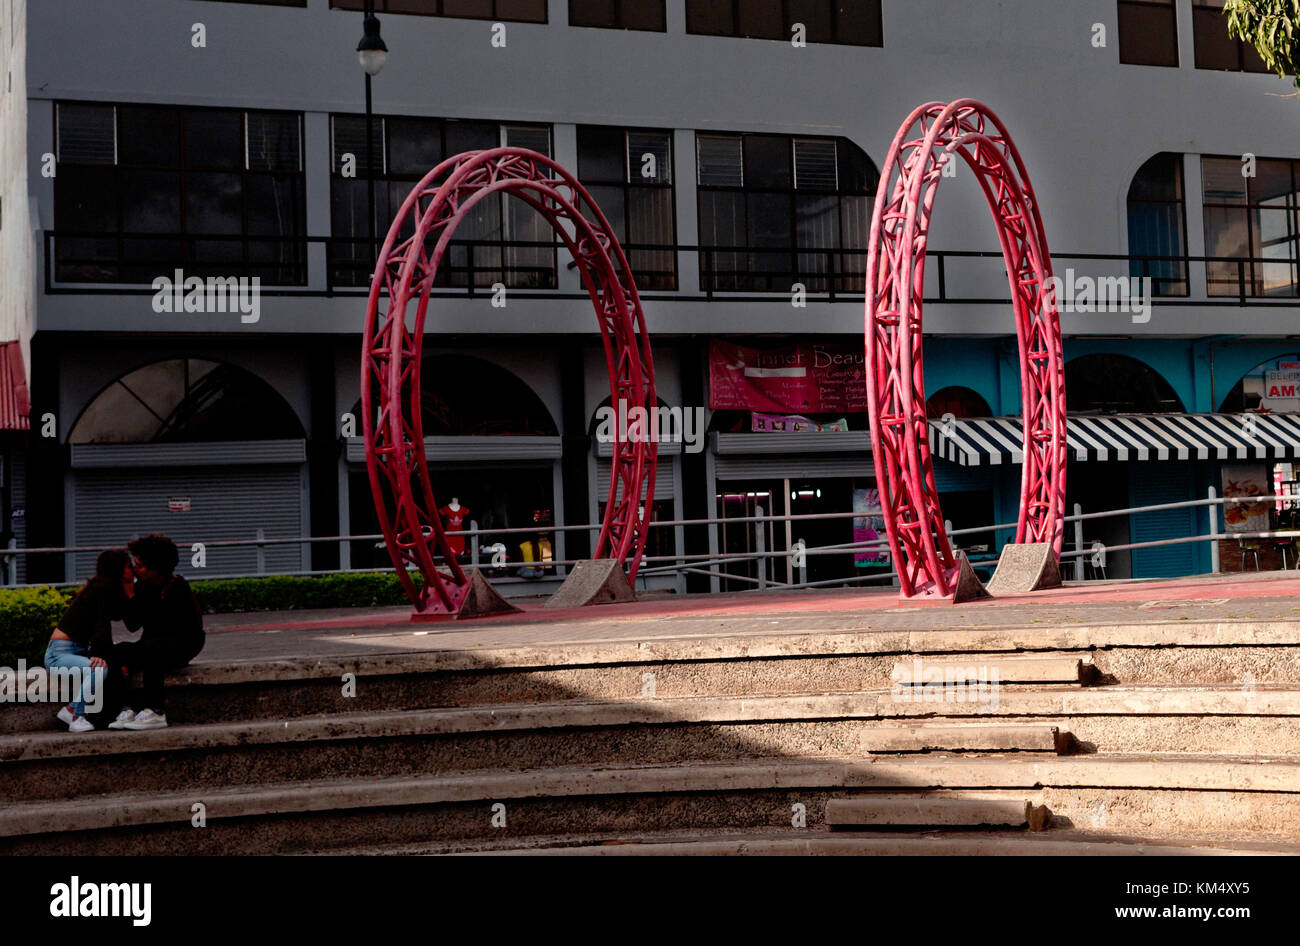 Two red wheels form art in a plaza square, San Jose, Costa Rica behind young couple Stock Photo